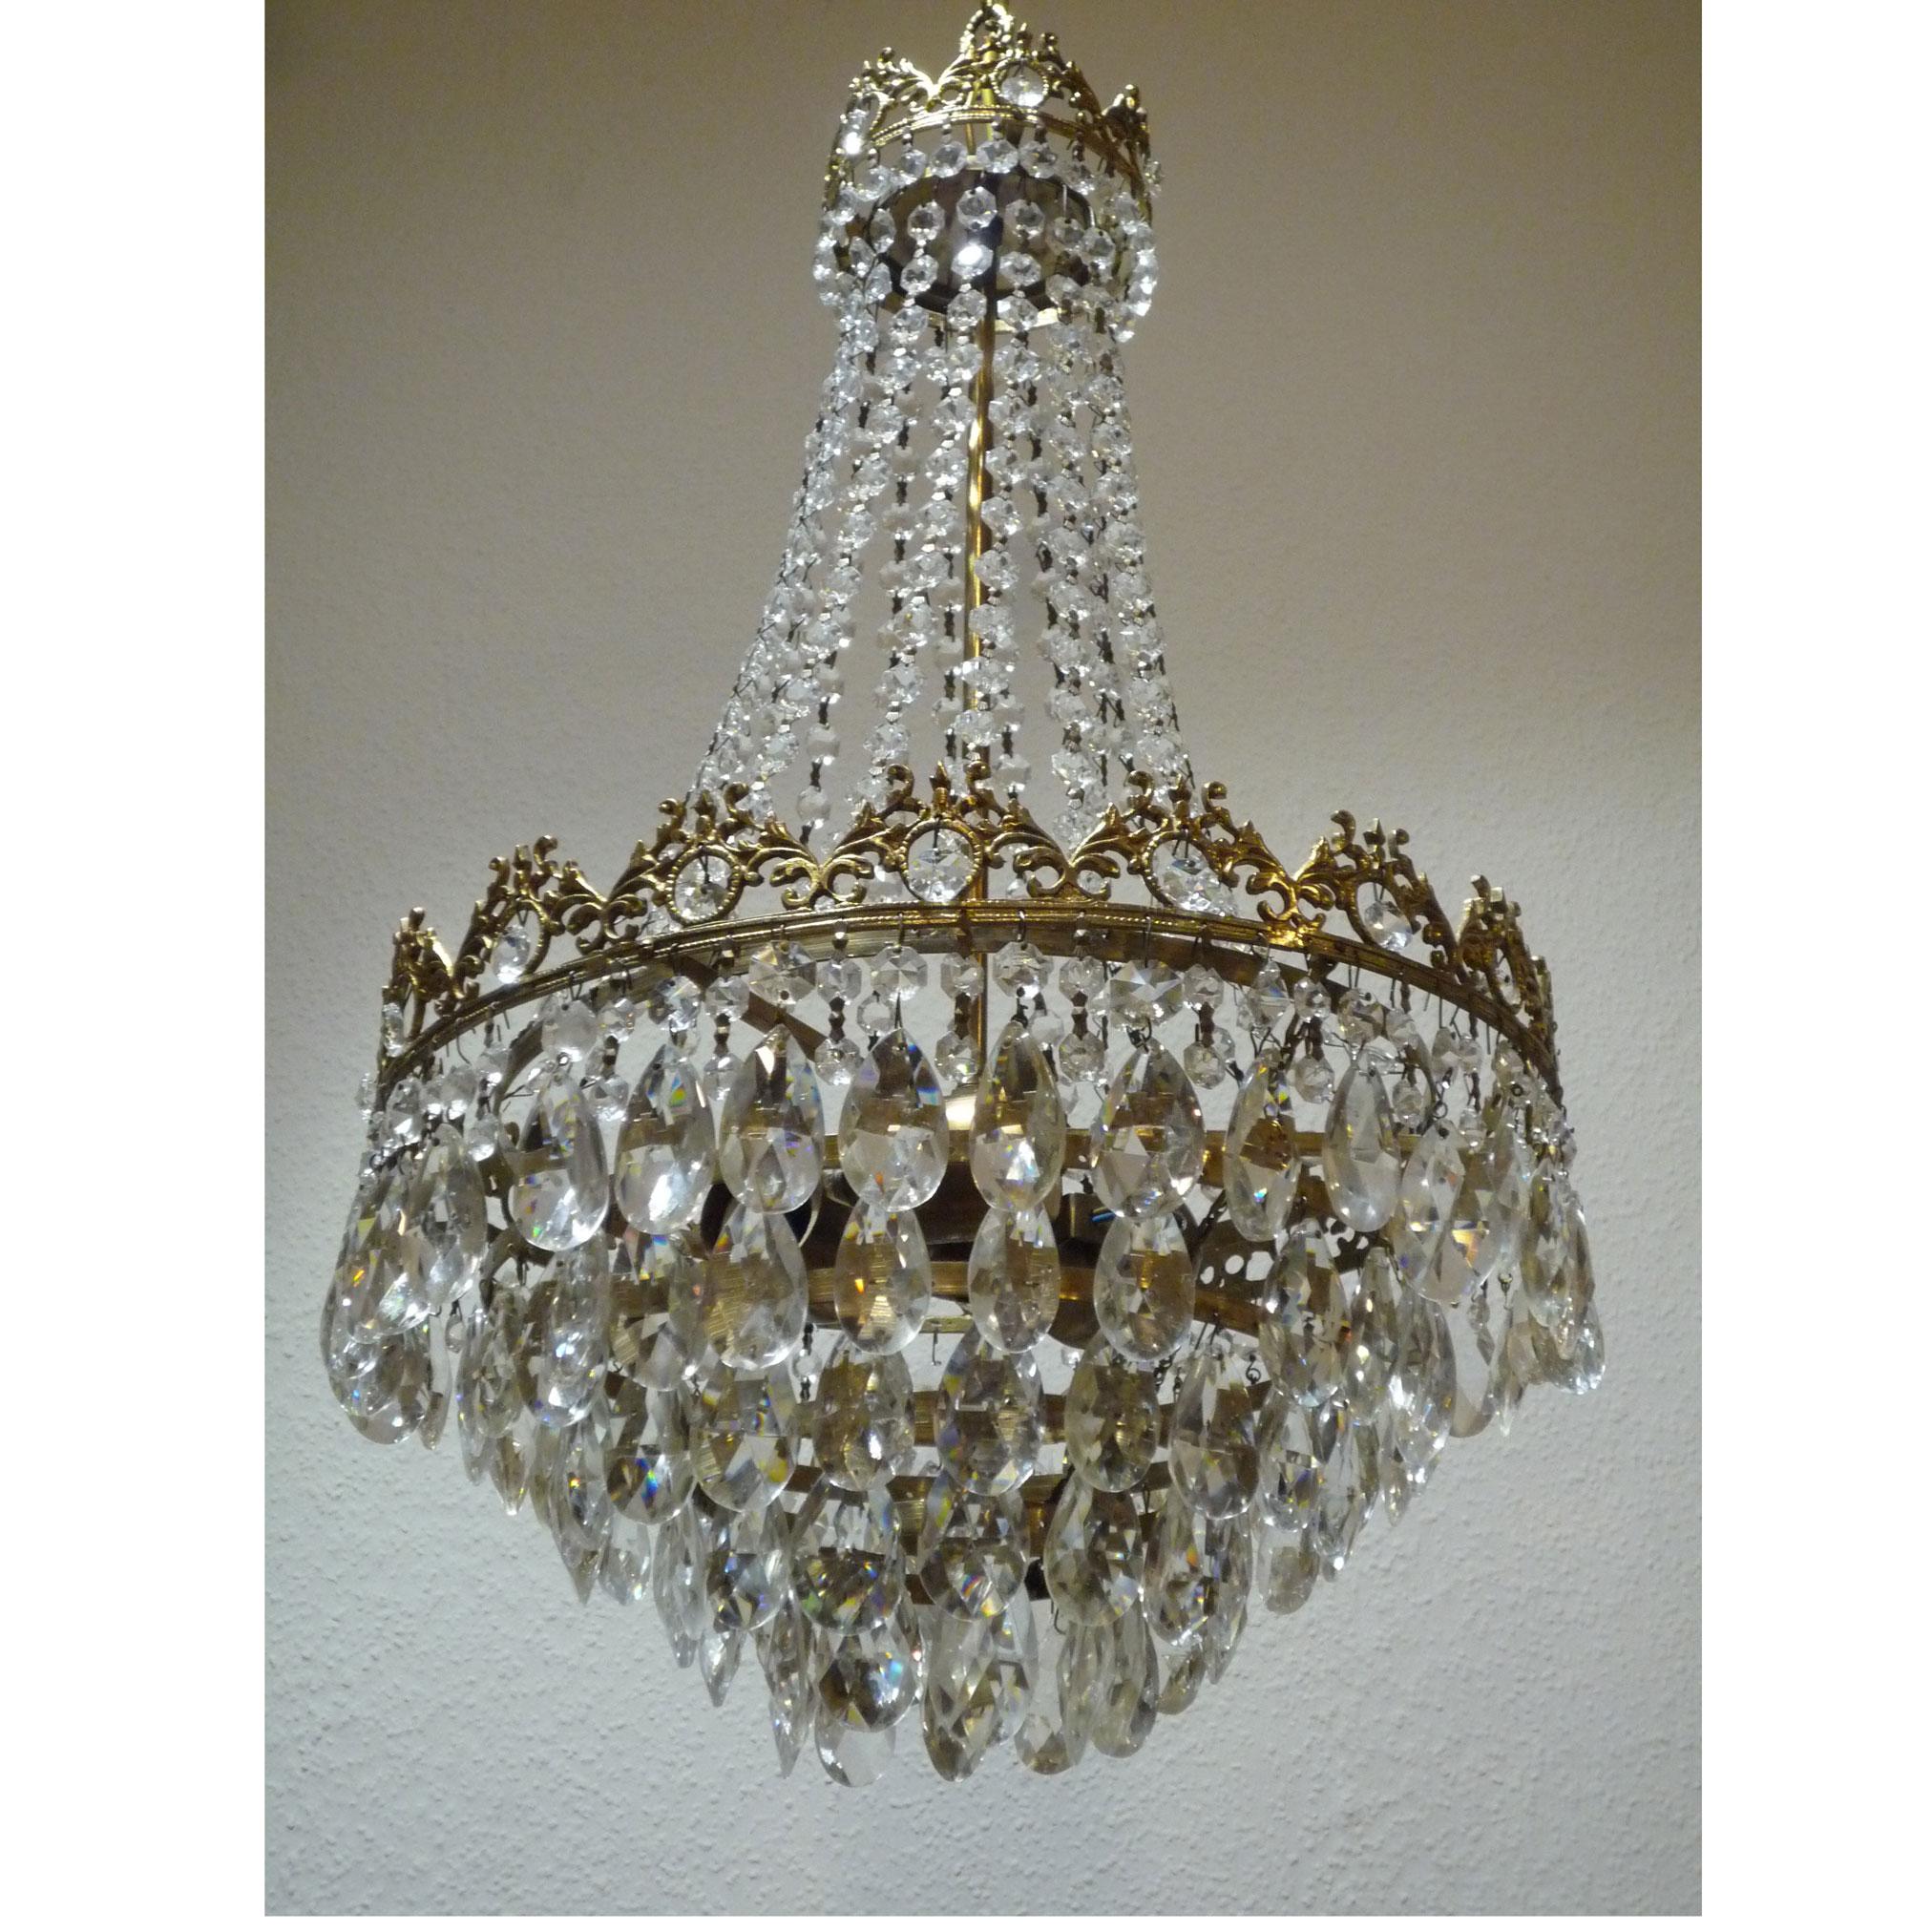 Small crystal chandelier

Richly decorated chandelier made of Bohemian, handcut crystal for illuminating small rooms. The chandelier was produced in the sixties of the last century, but clearly uses neoclassical forms.

Due to the design with